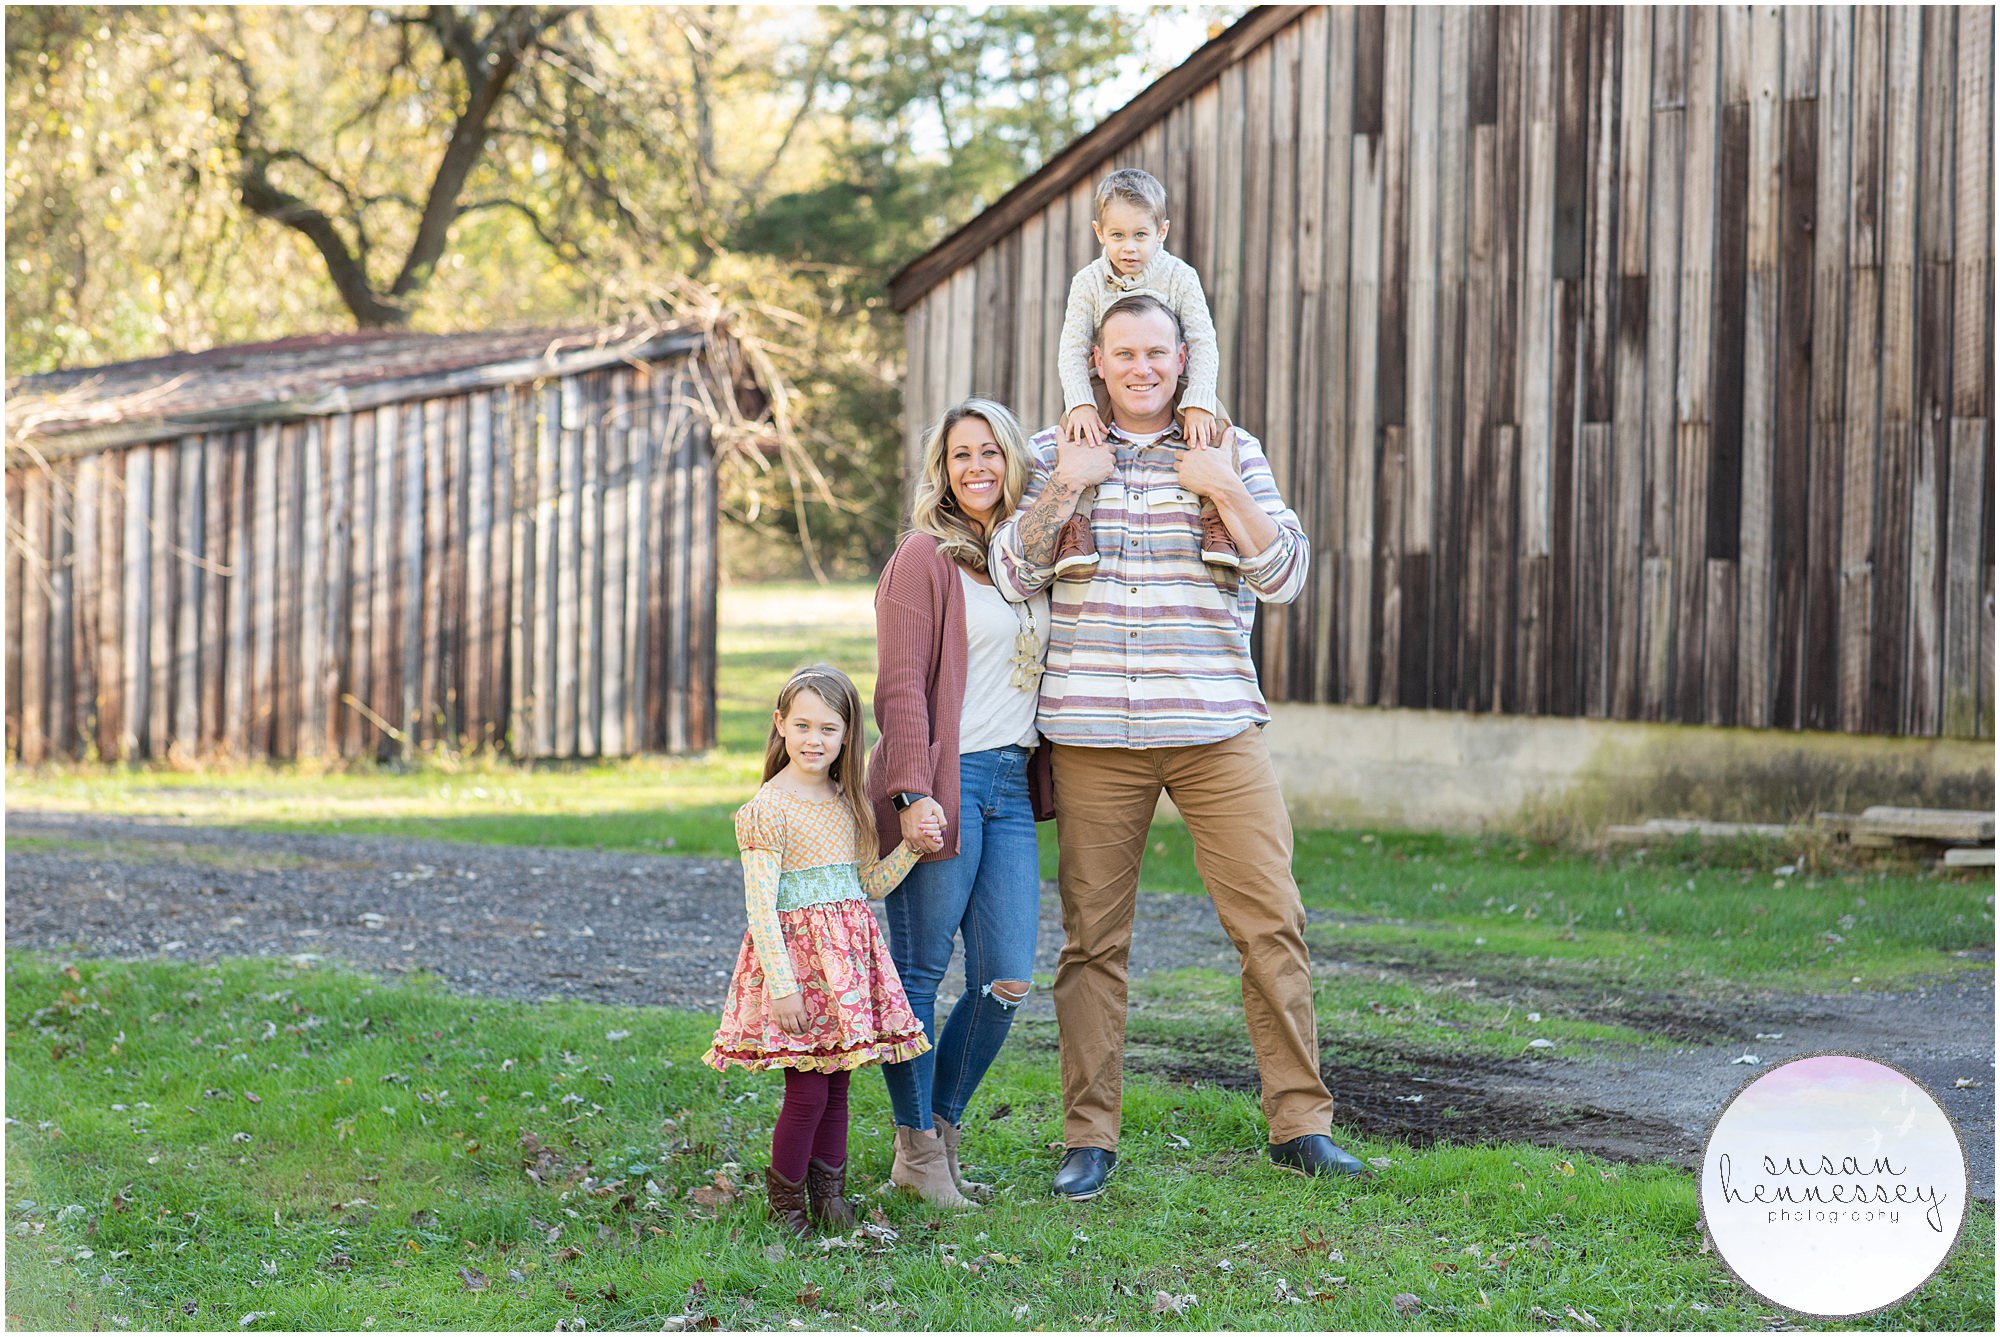 Rustic locations are the perfect location for your South Jersey holiday family photo session